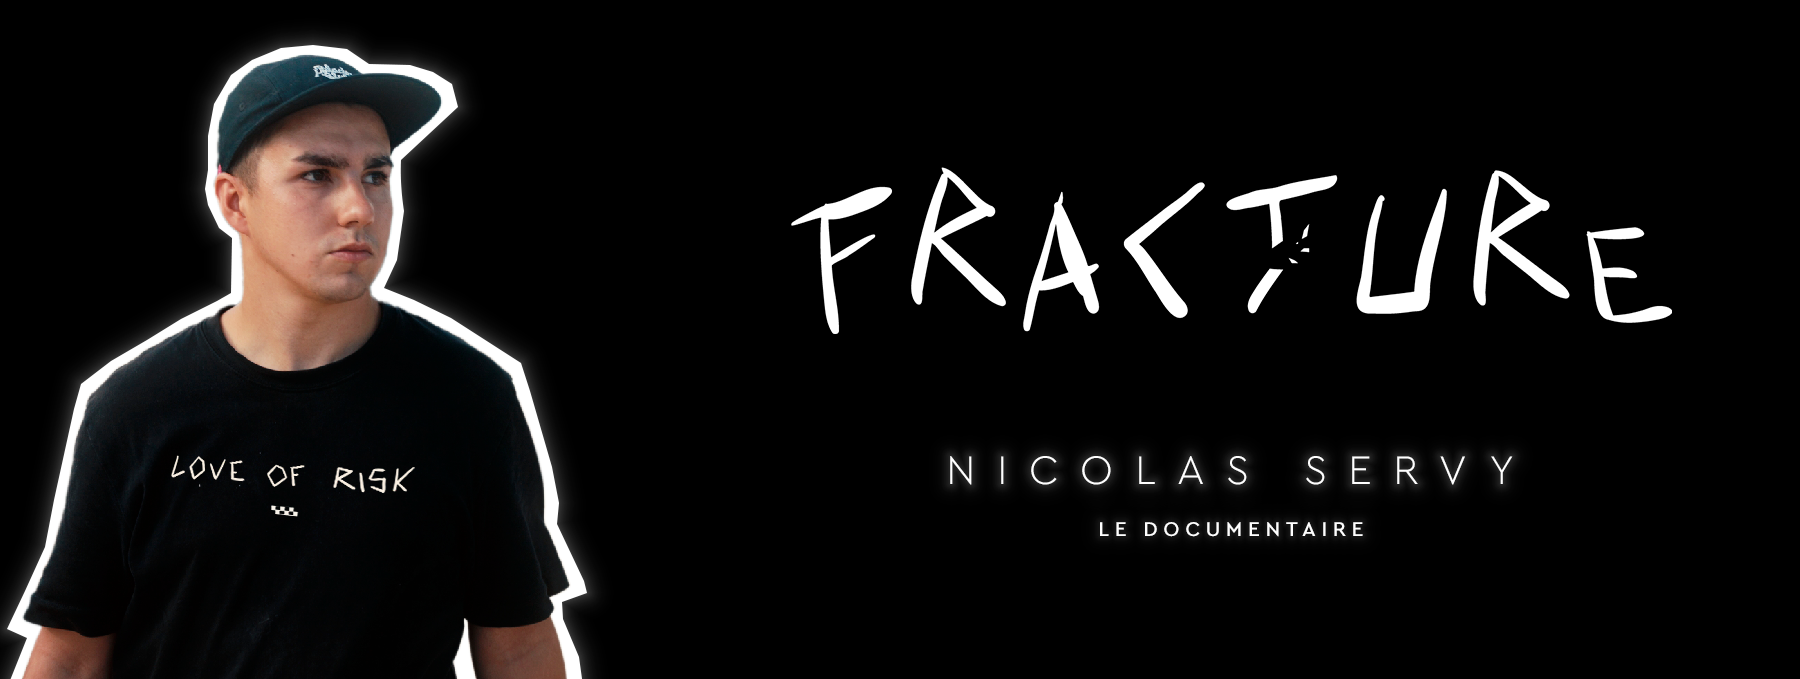 Nicolas Servy by Fracture Mindset 